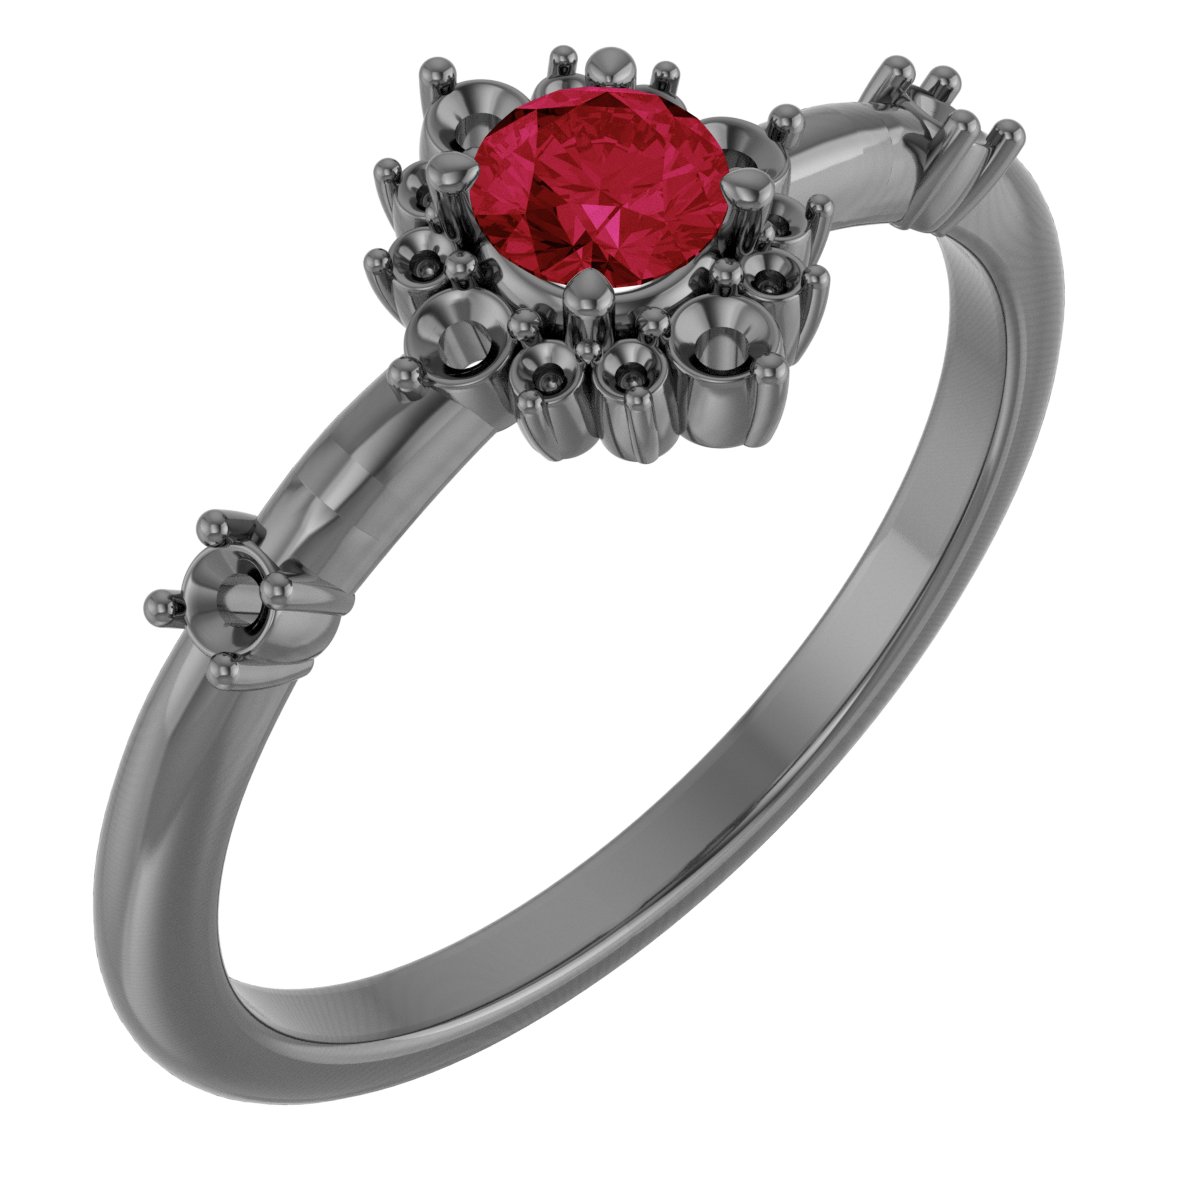 14K Rose Ruby and .167 CTW Diamond Ring Ref. 15641458